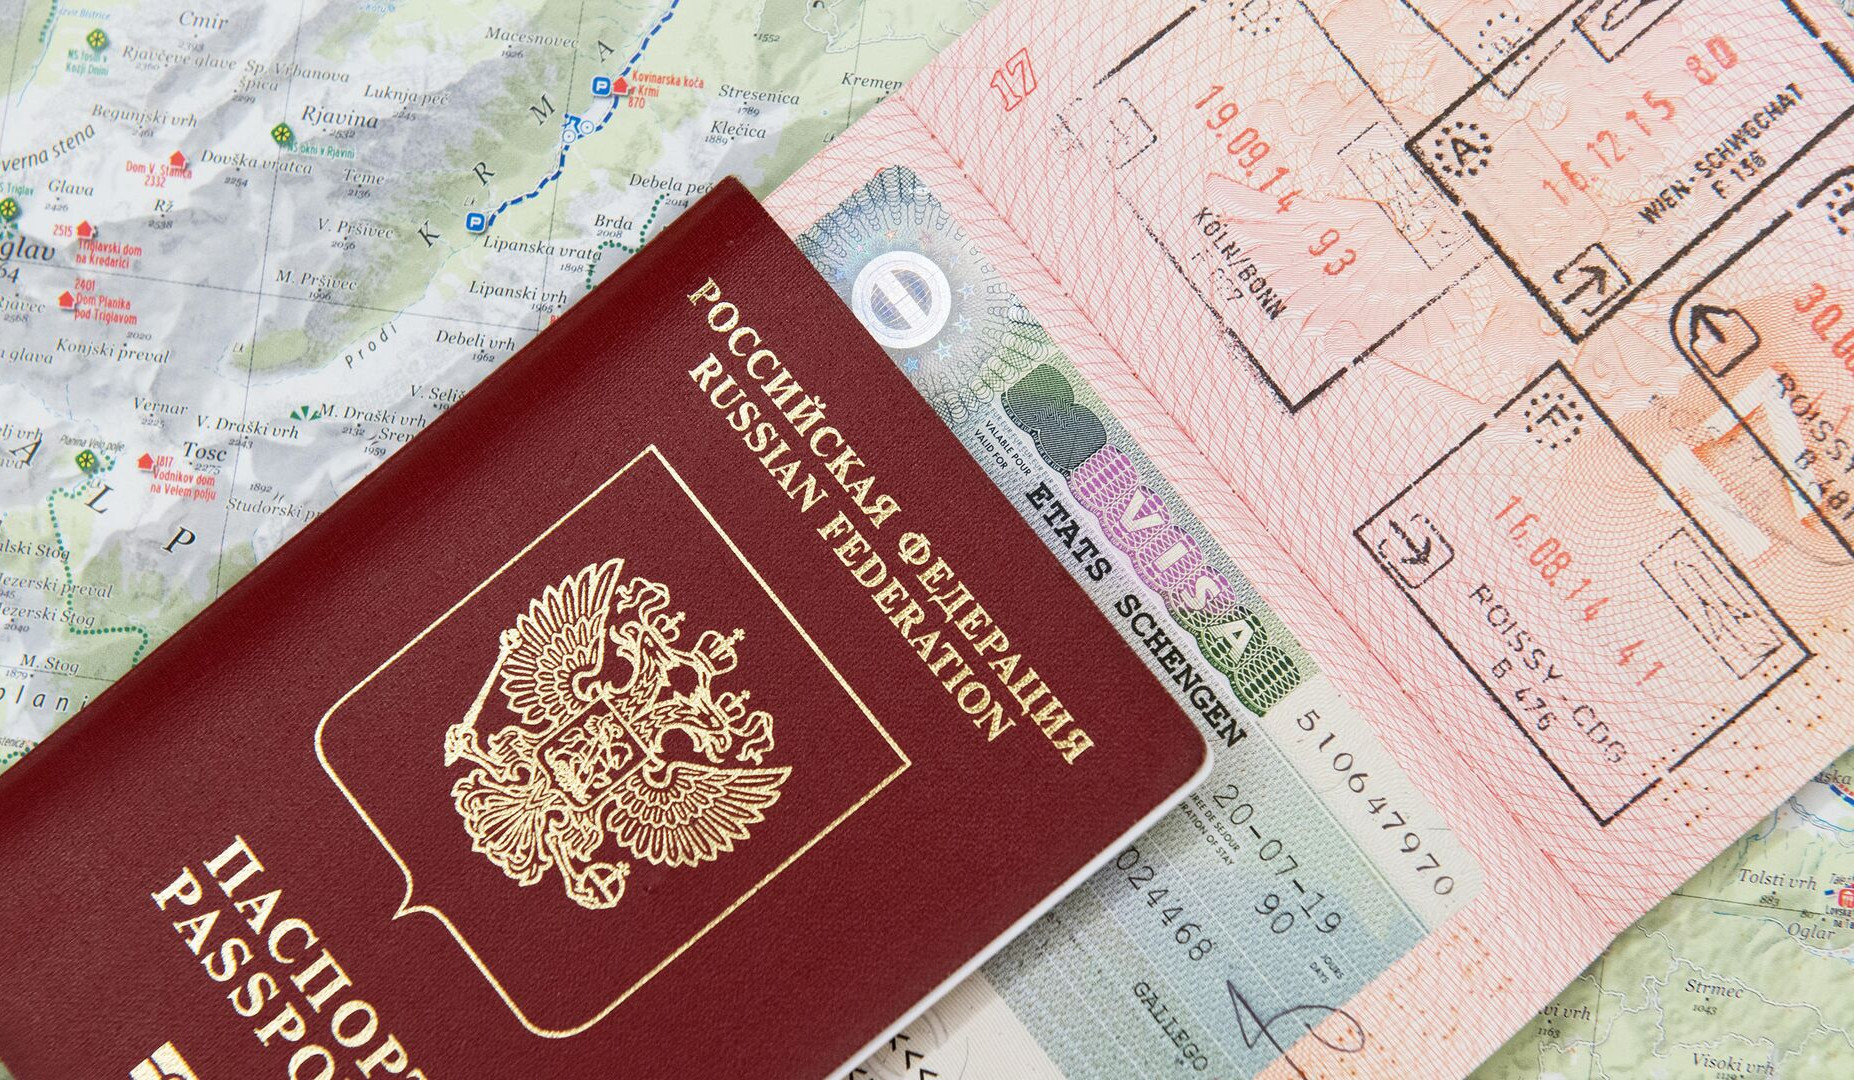 Some officials urge EU to stop issuing tourist visas to Russians